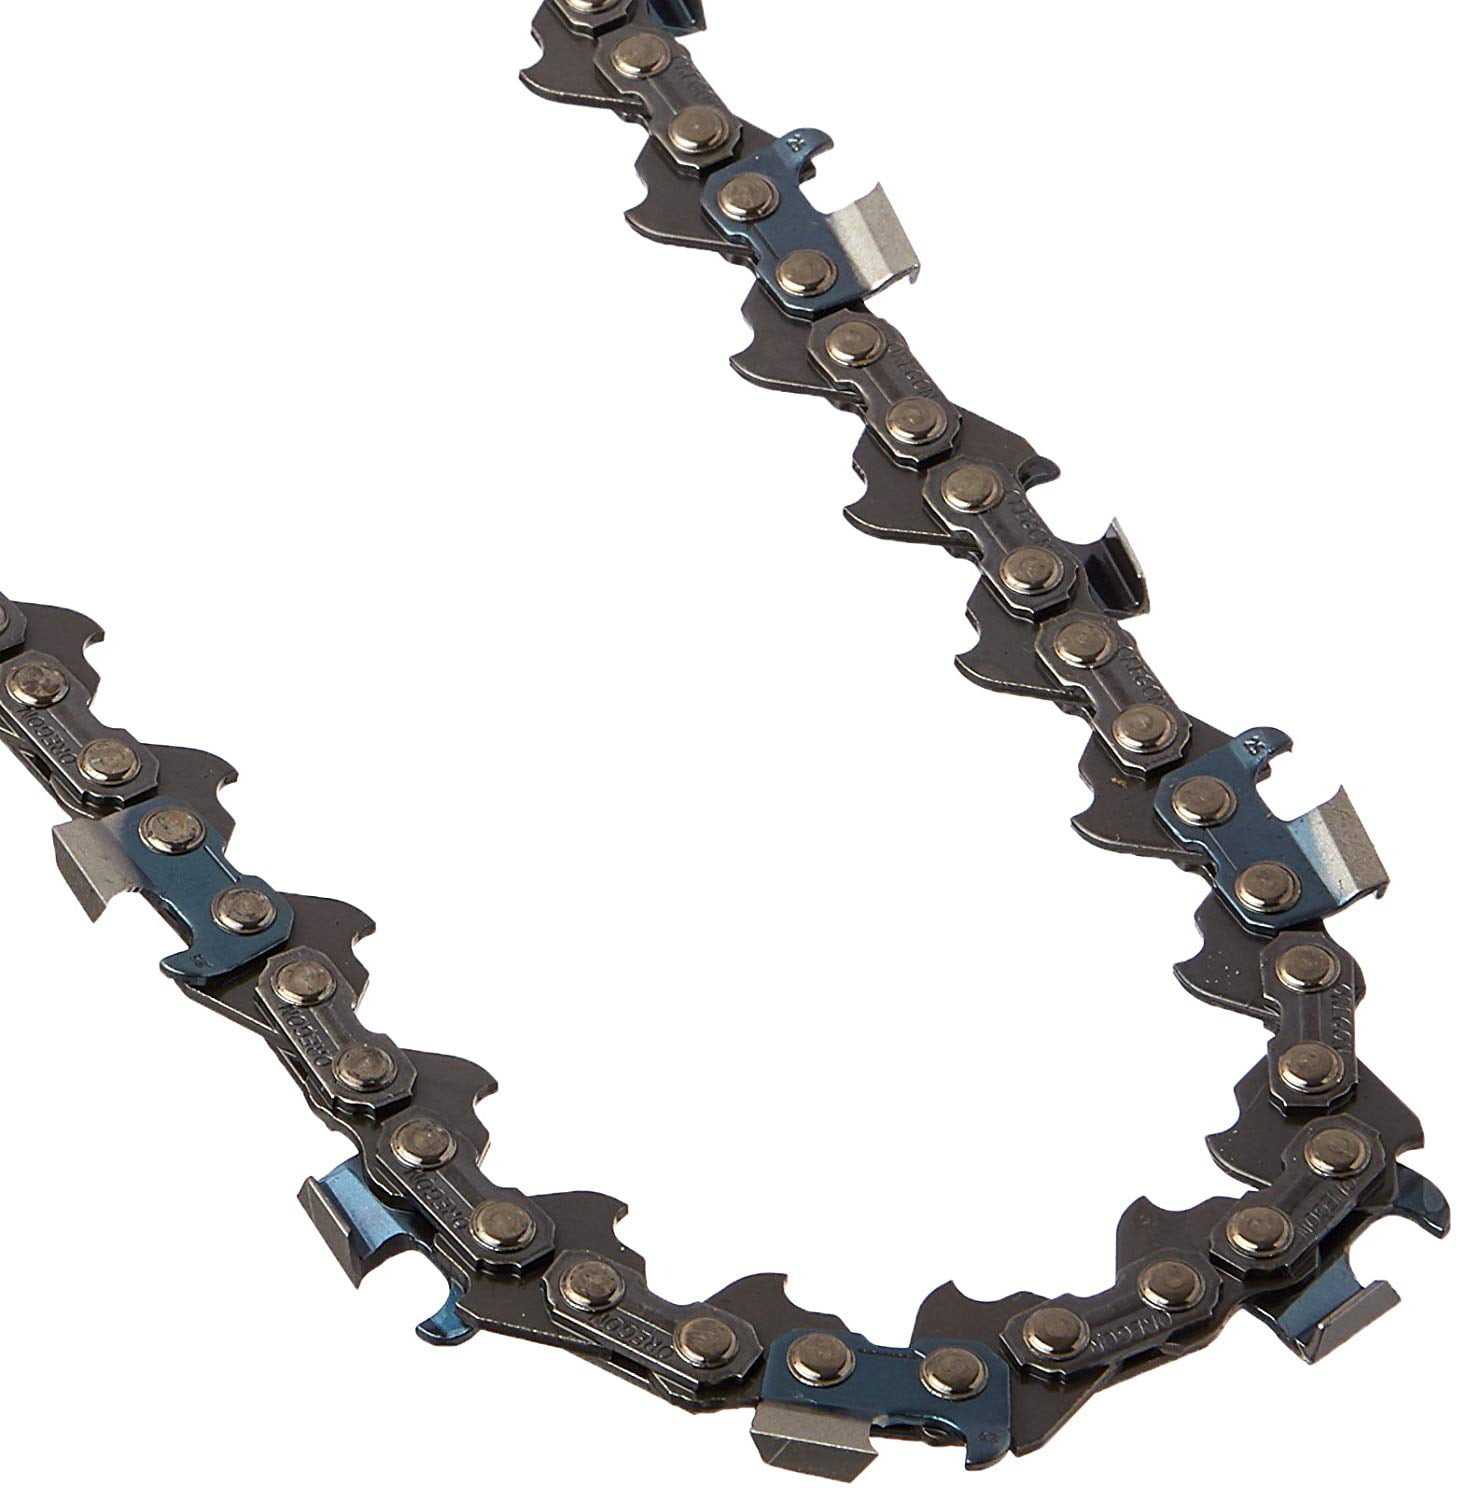 REPLACEMENT HUSQVARNA 372XP CHAINSAW CHAIN for 24" BAR 84 DRIVE LINKS TYPE 73 